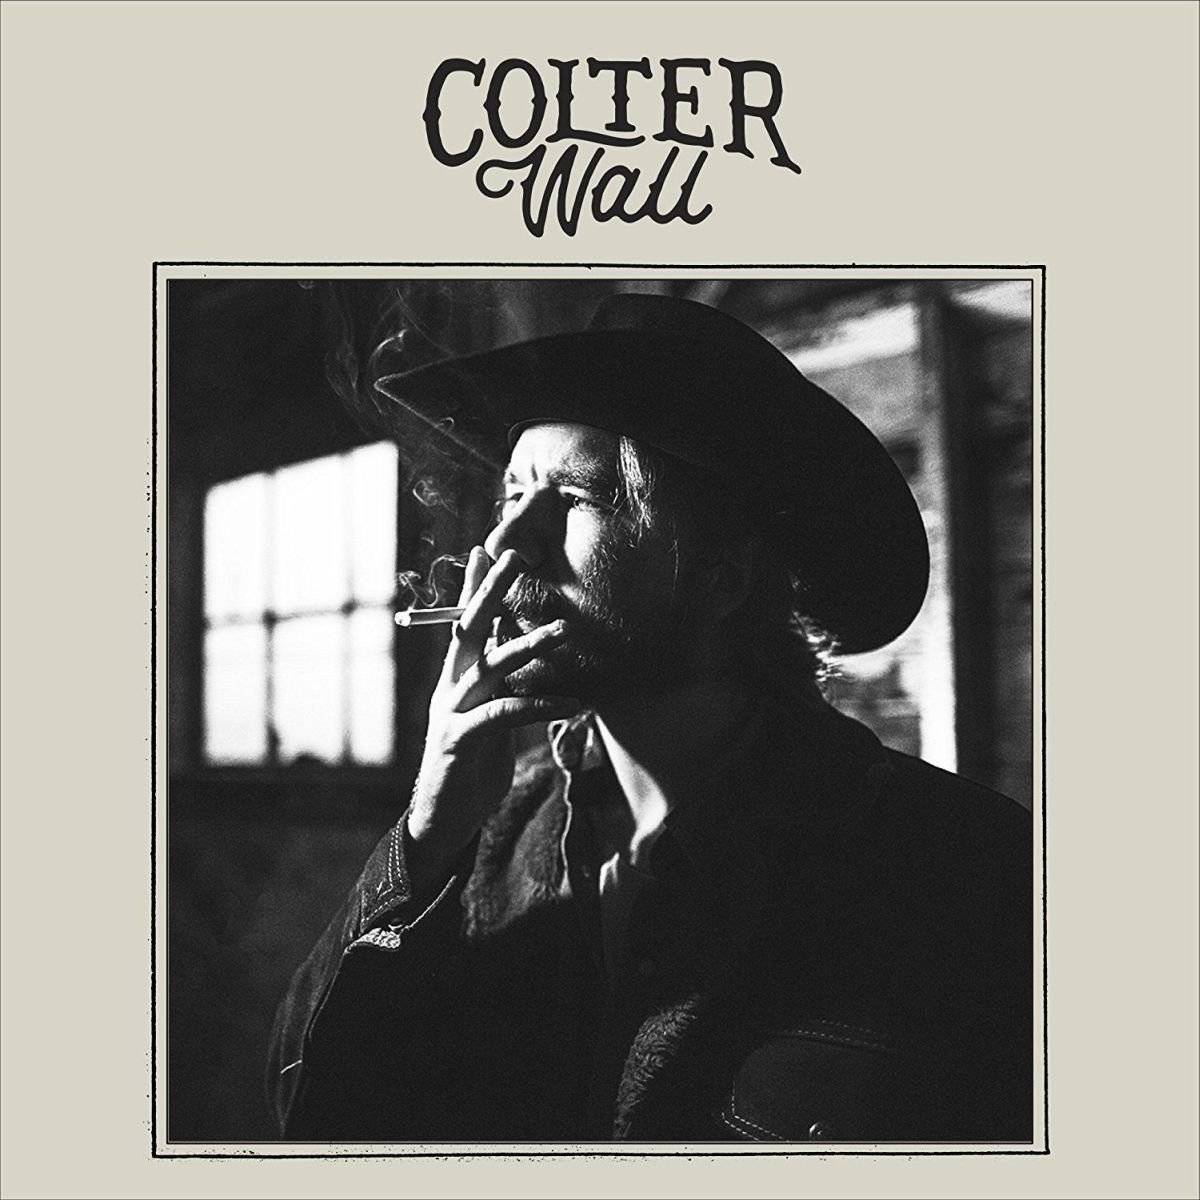 Colter Wall - Colter Wall (2017) [FLAC 24bit/96kHz]